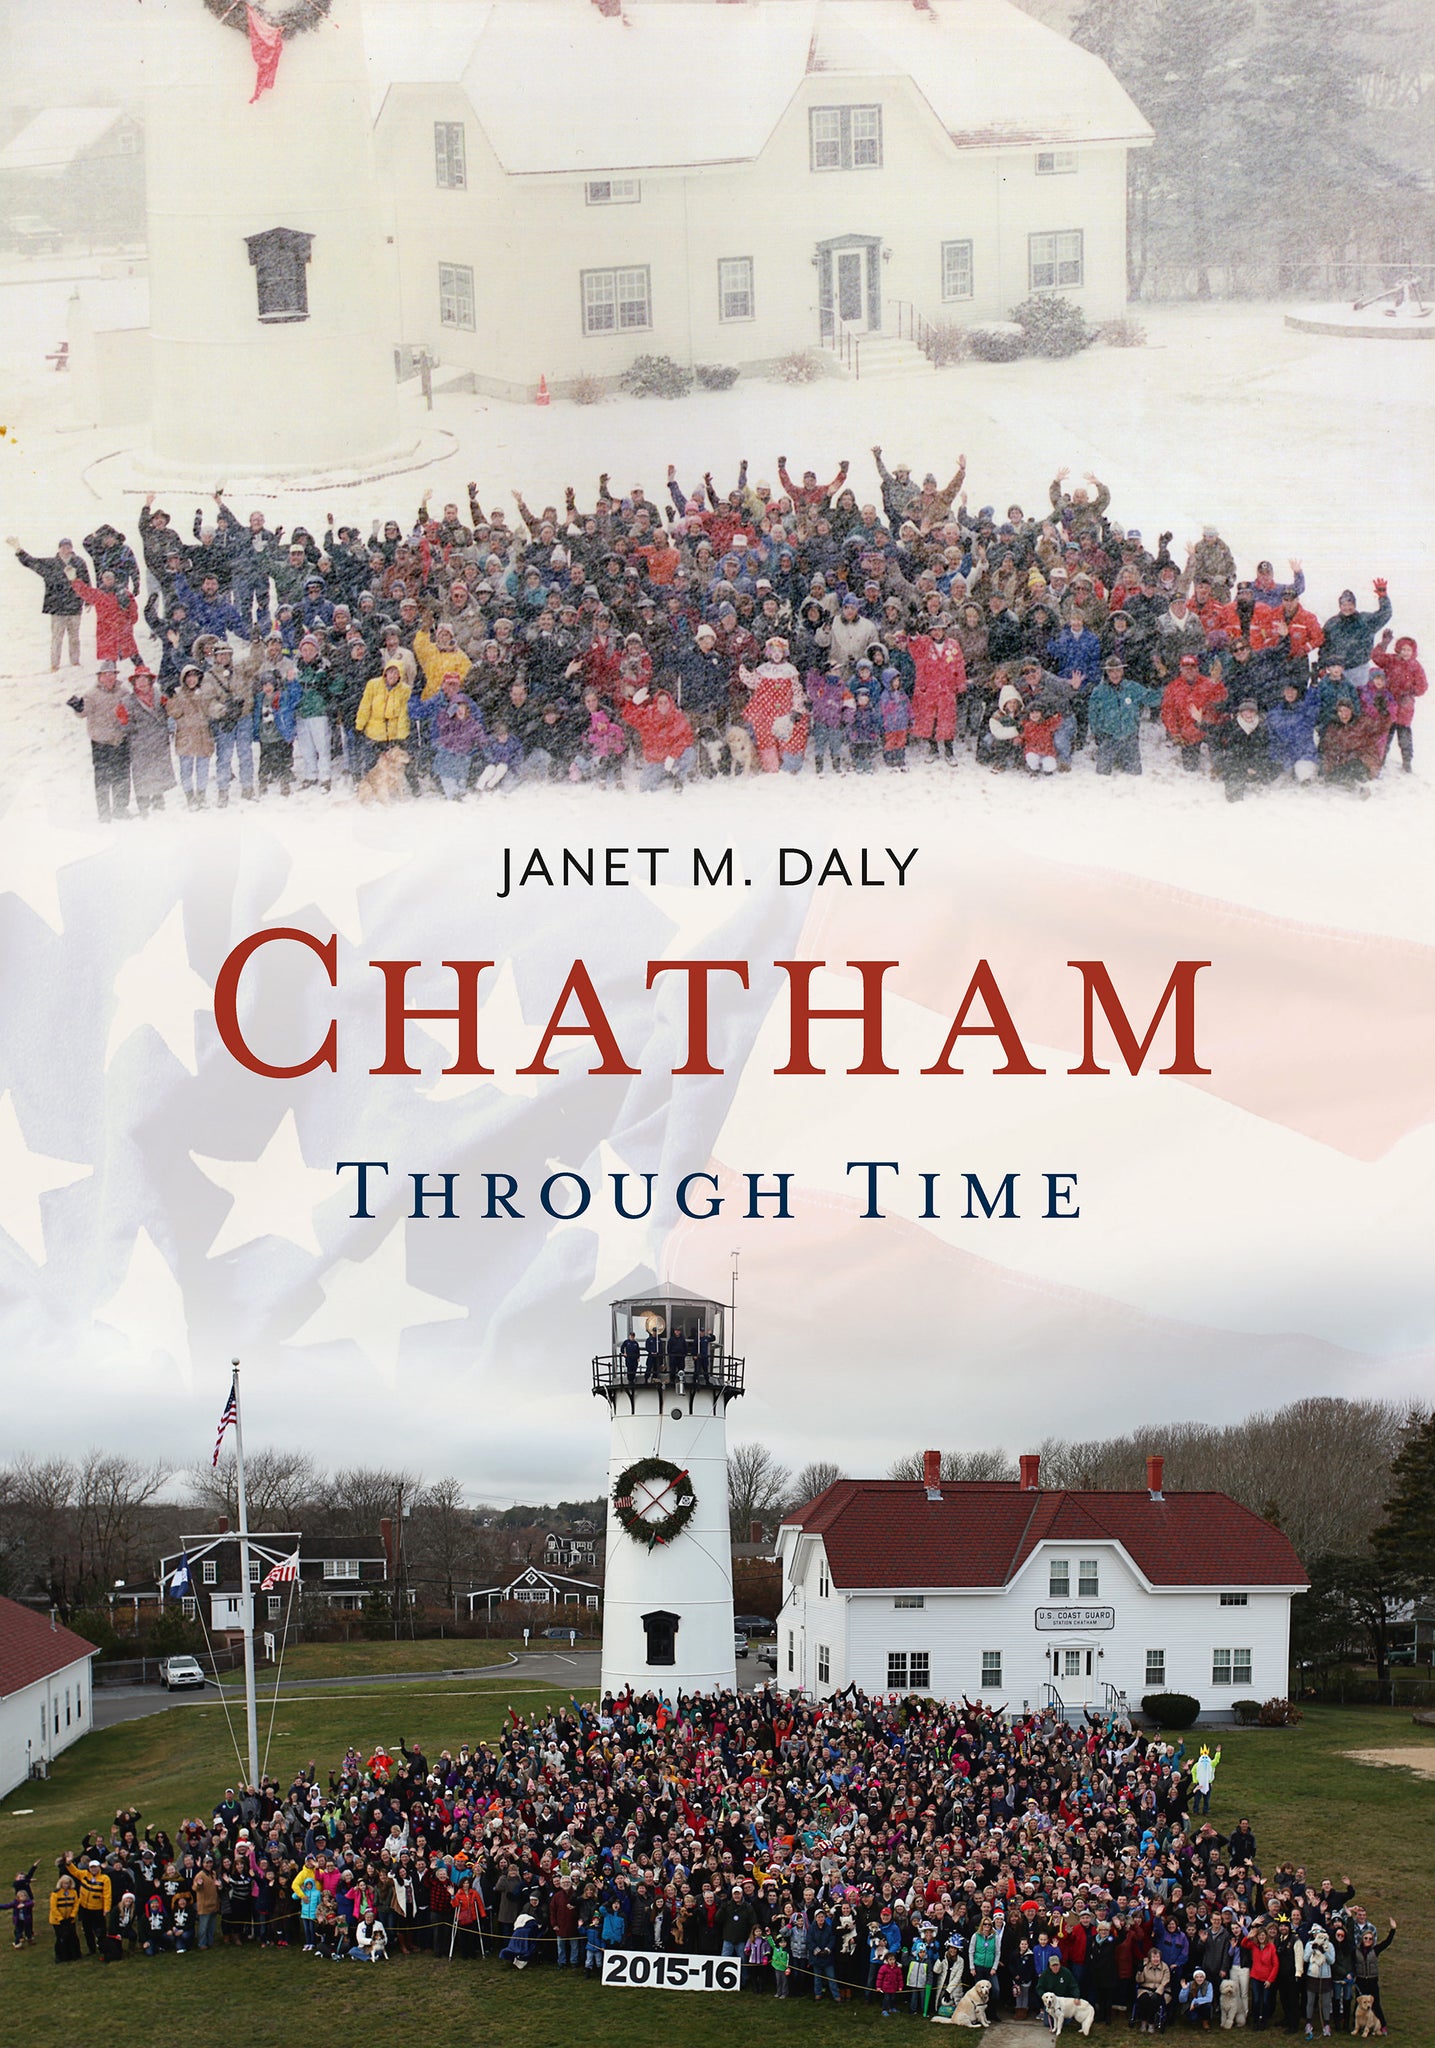 Chatham Through Time - published by America Through Time